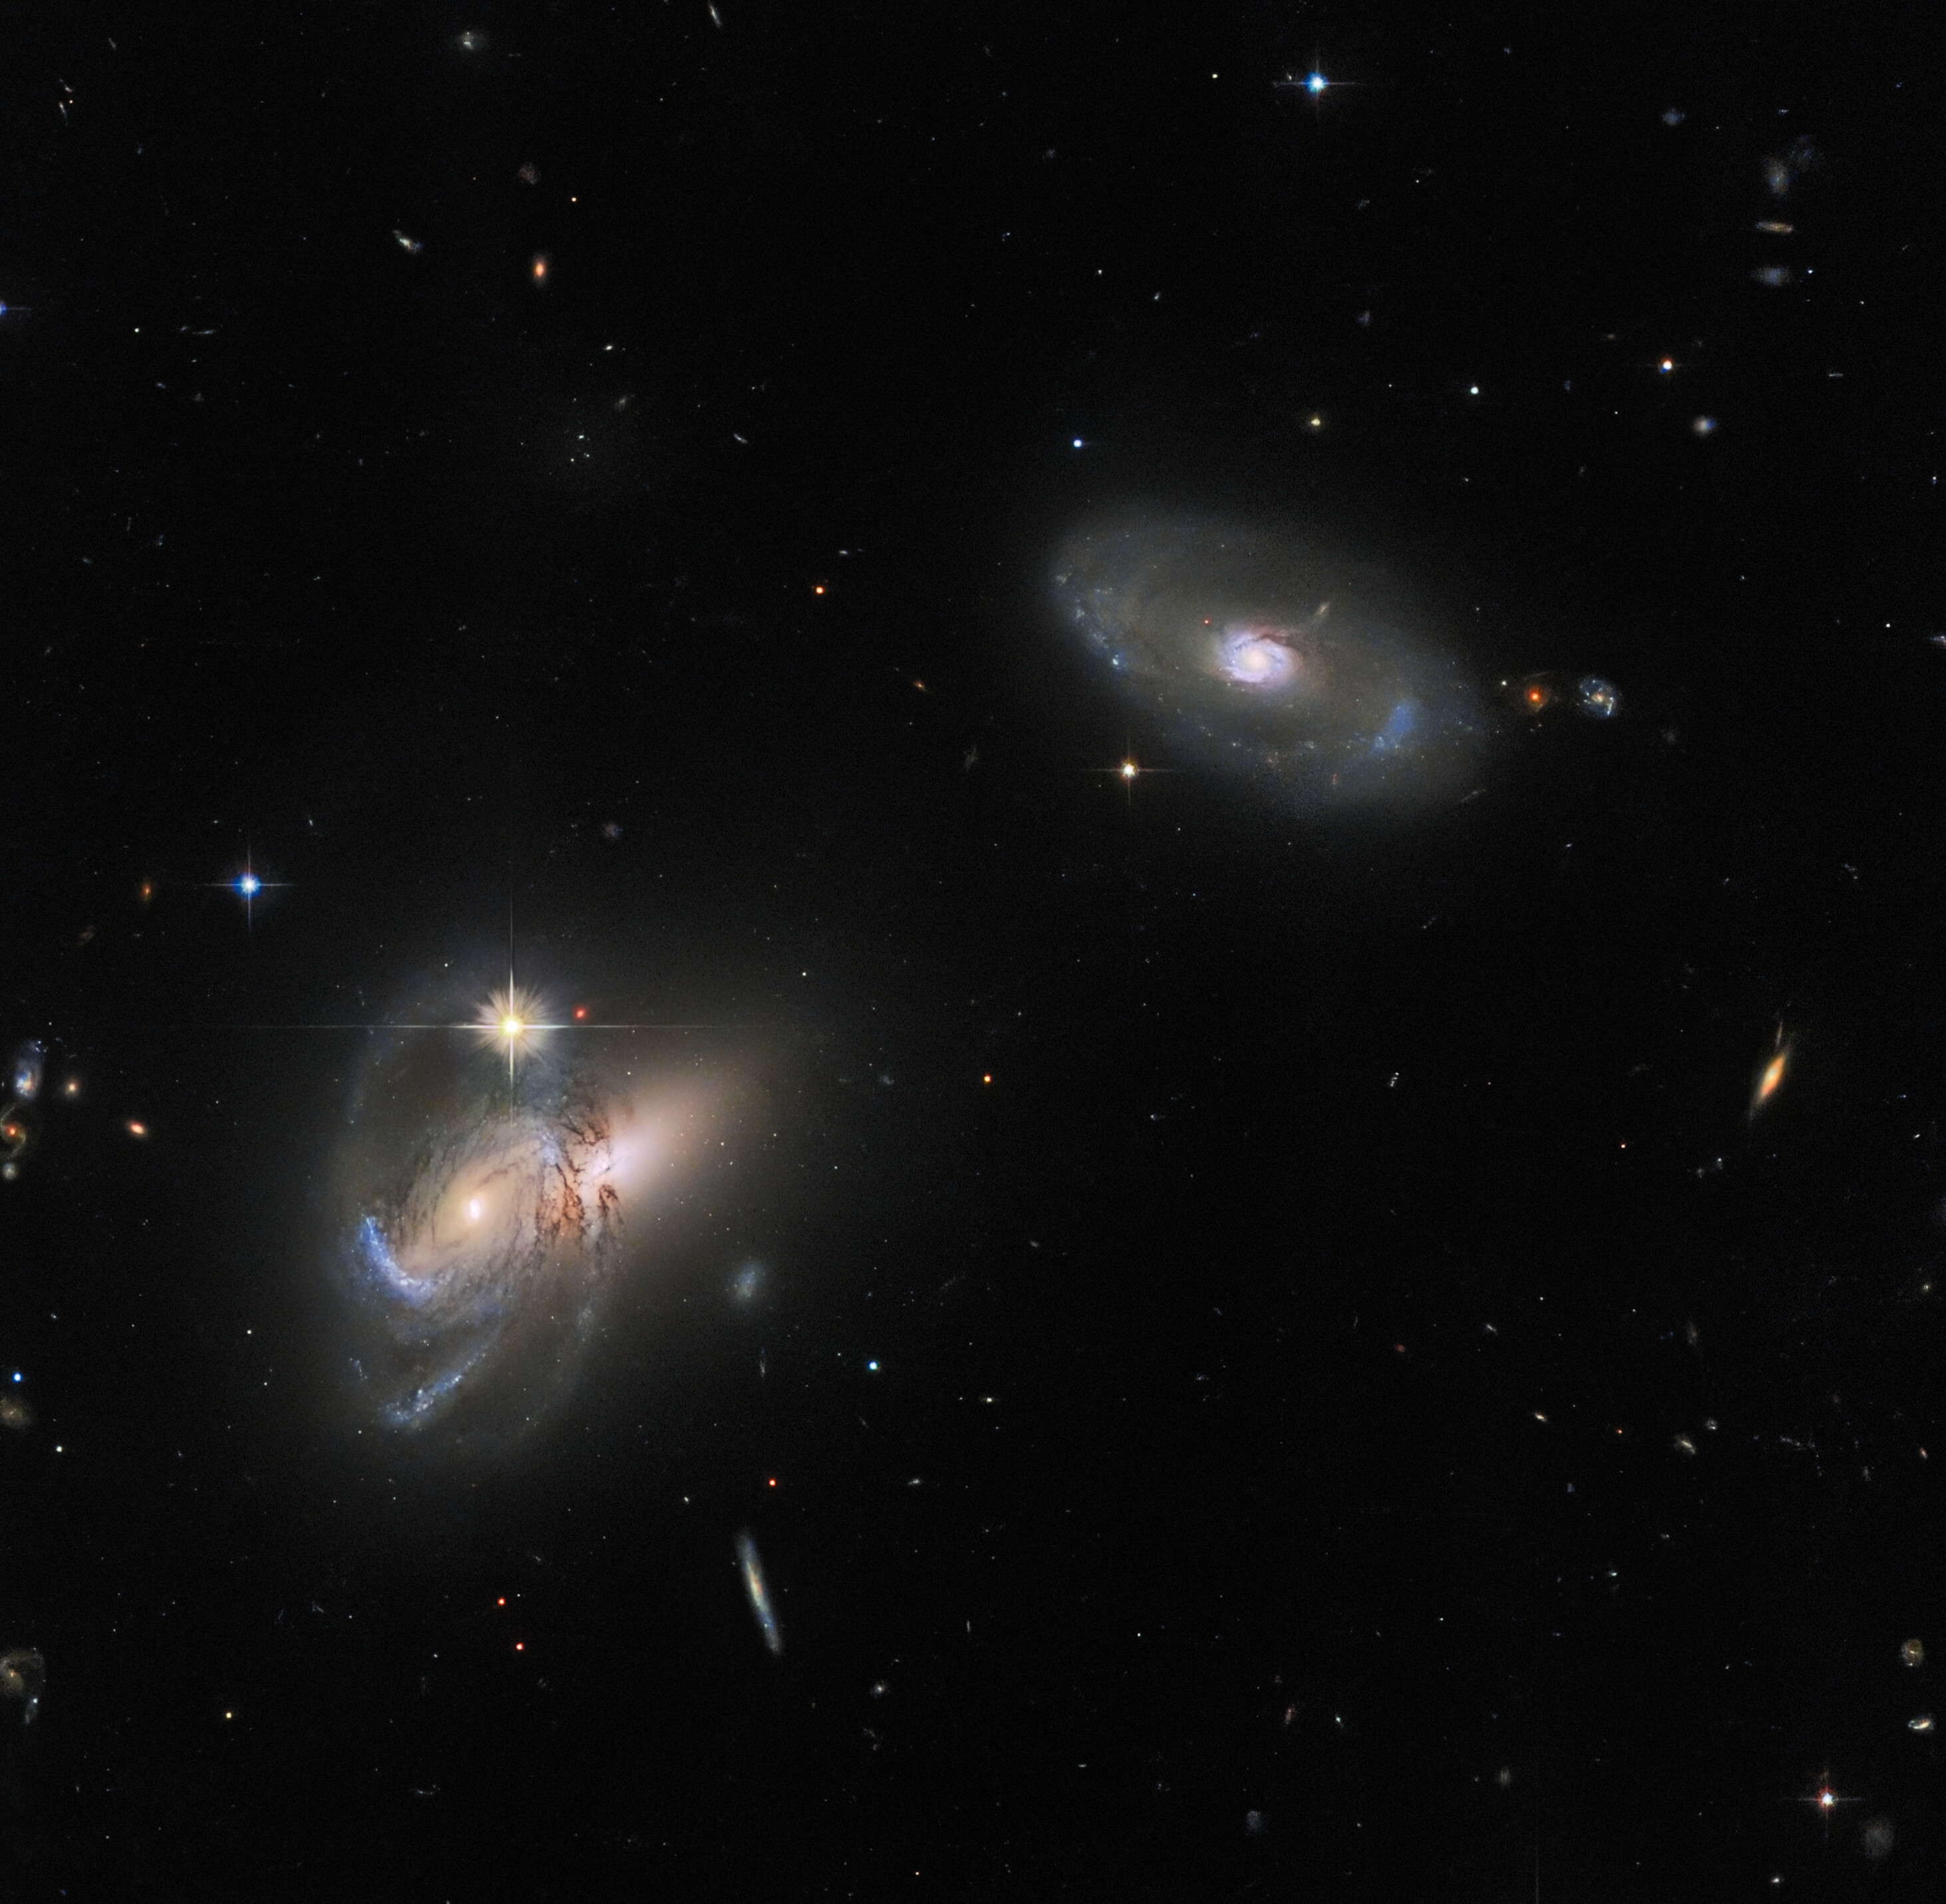 Check out this luminescent Hubble image featuring multiple galaxies